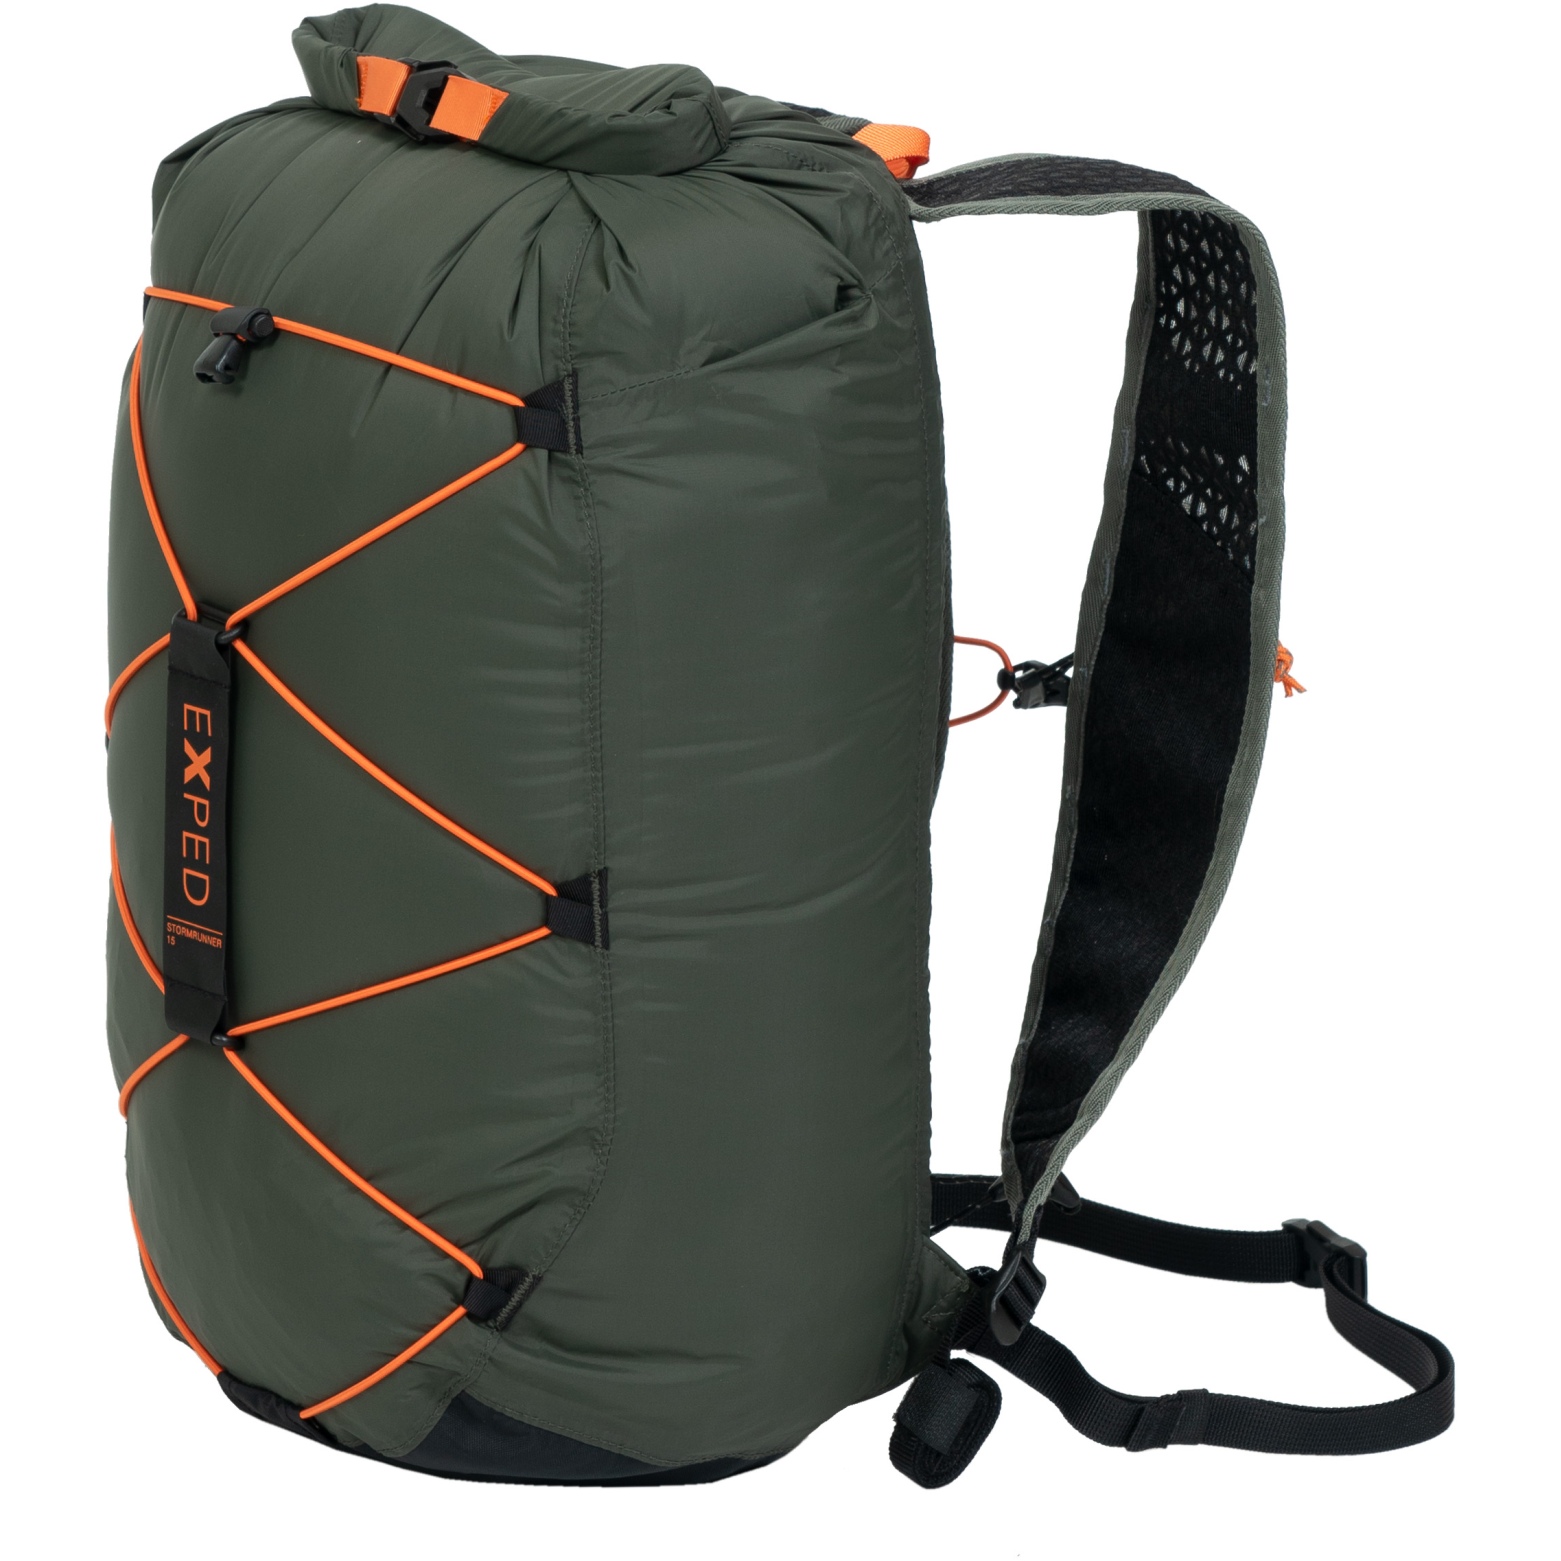 Picture of Exped Stormrunner 15 Backpack - moraine